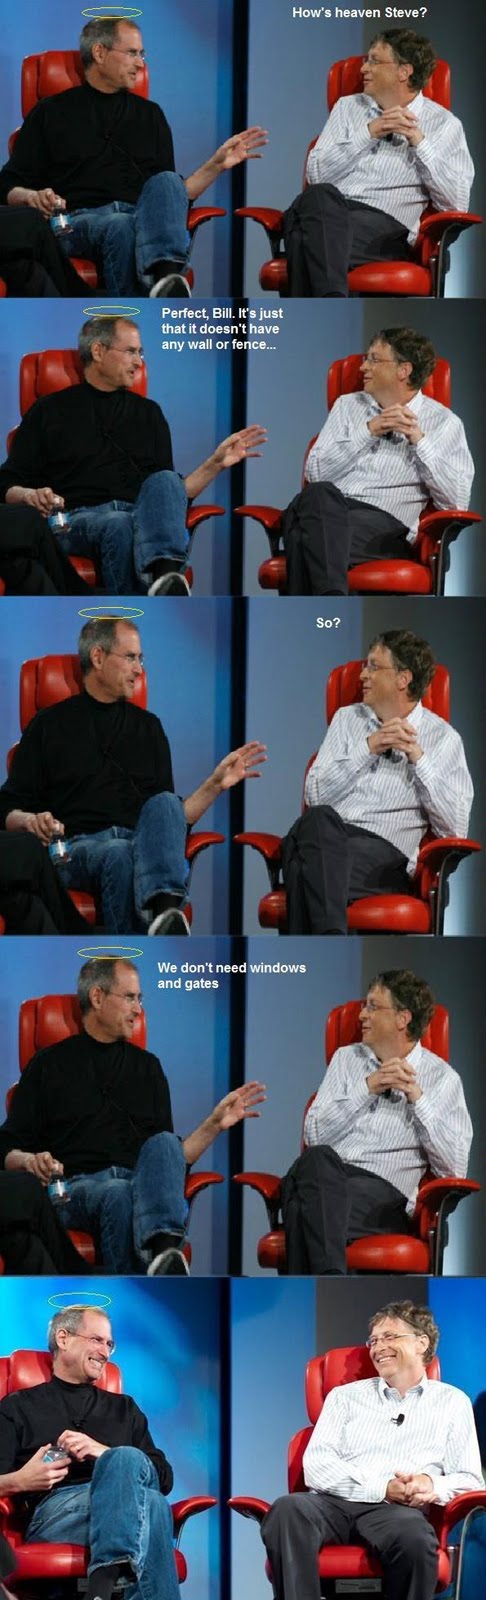 Steve Jobs And Bill Gates Talking About Heaven